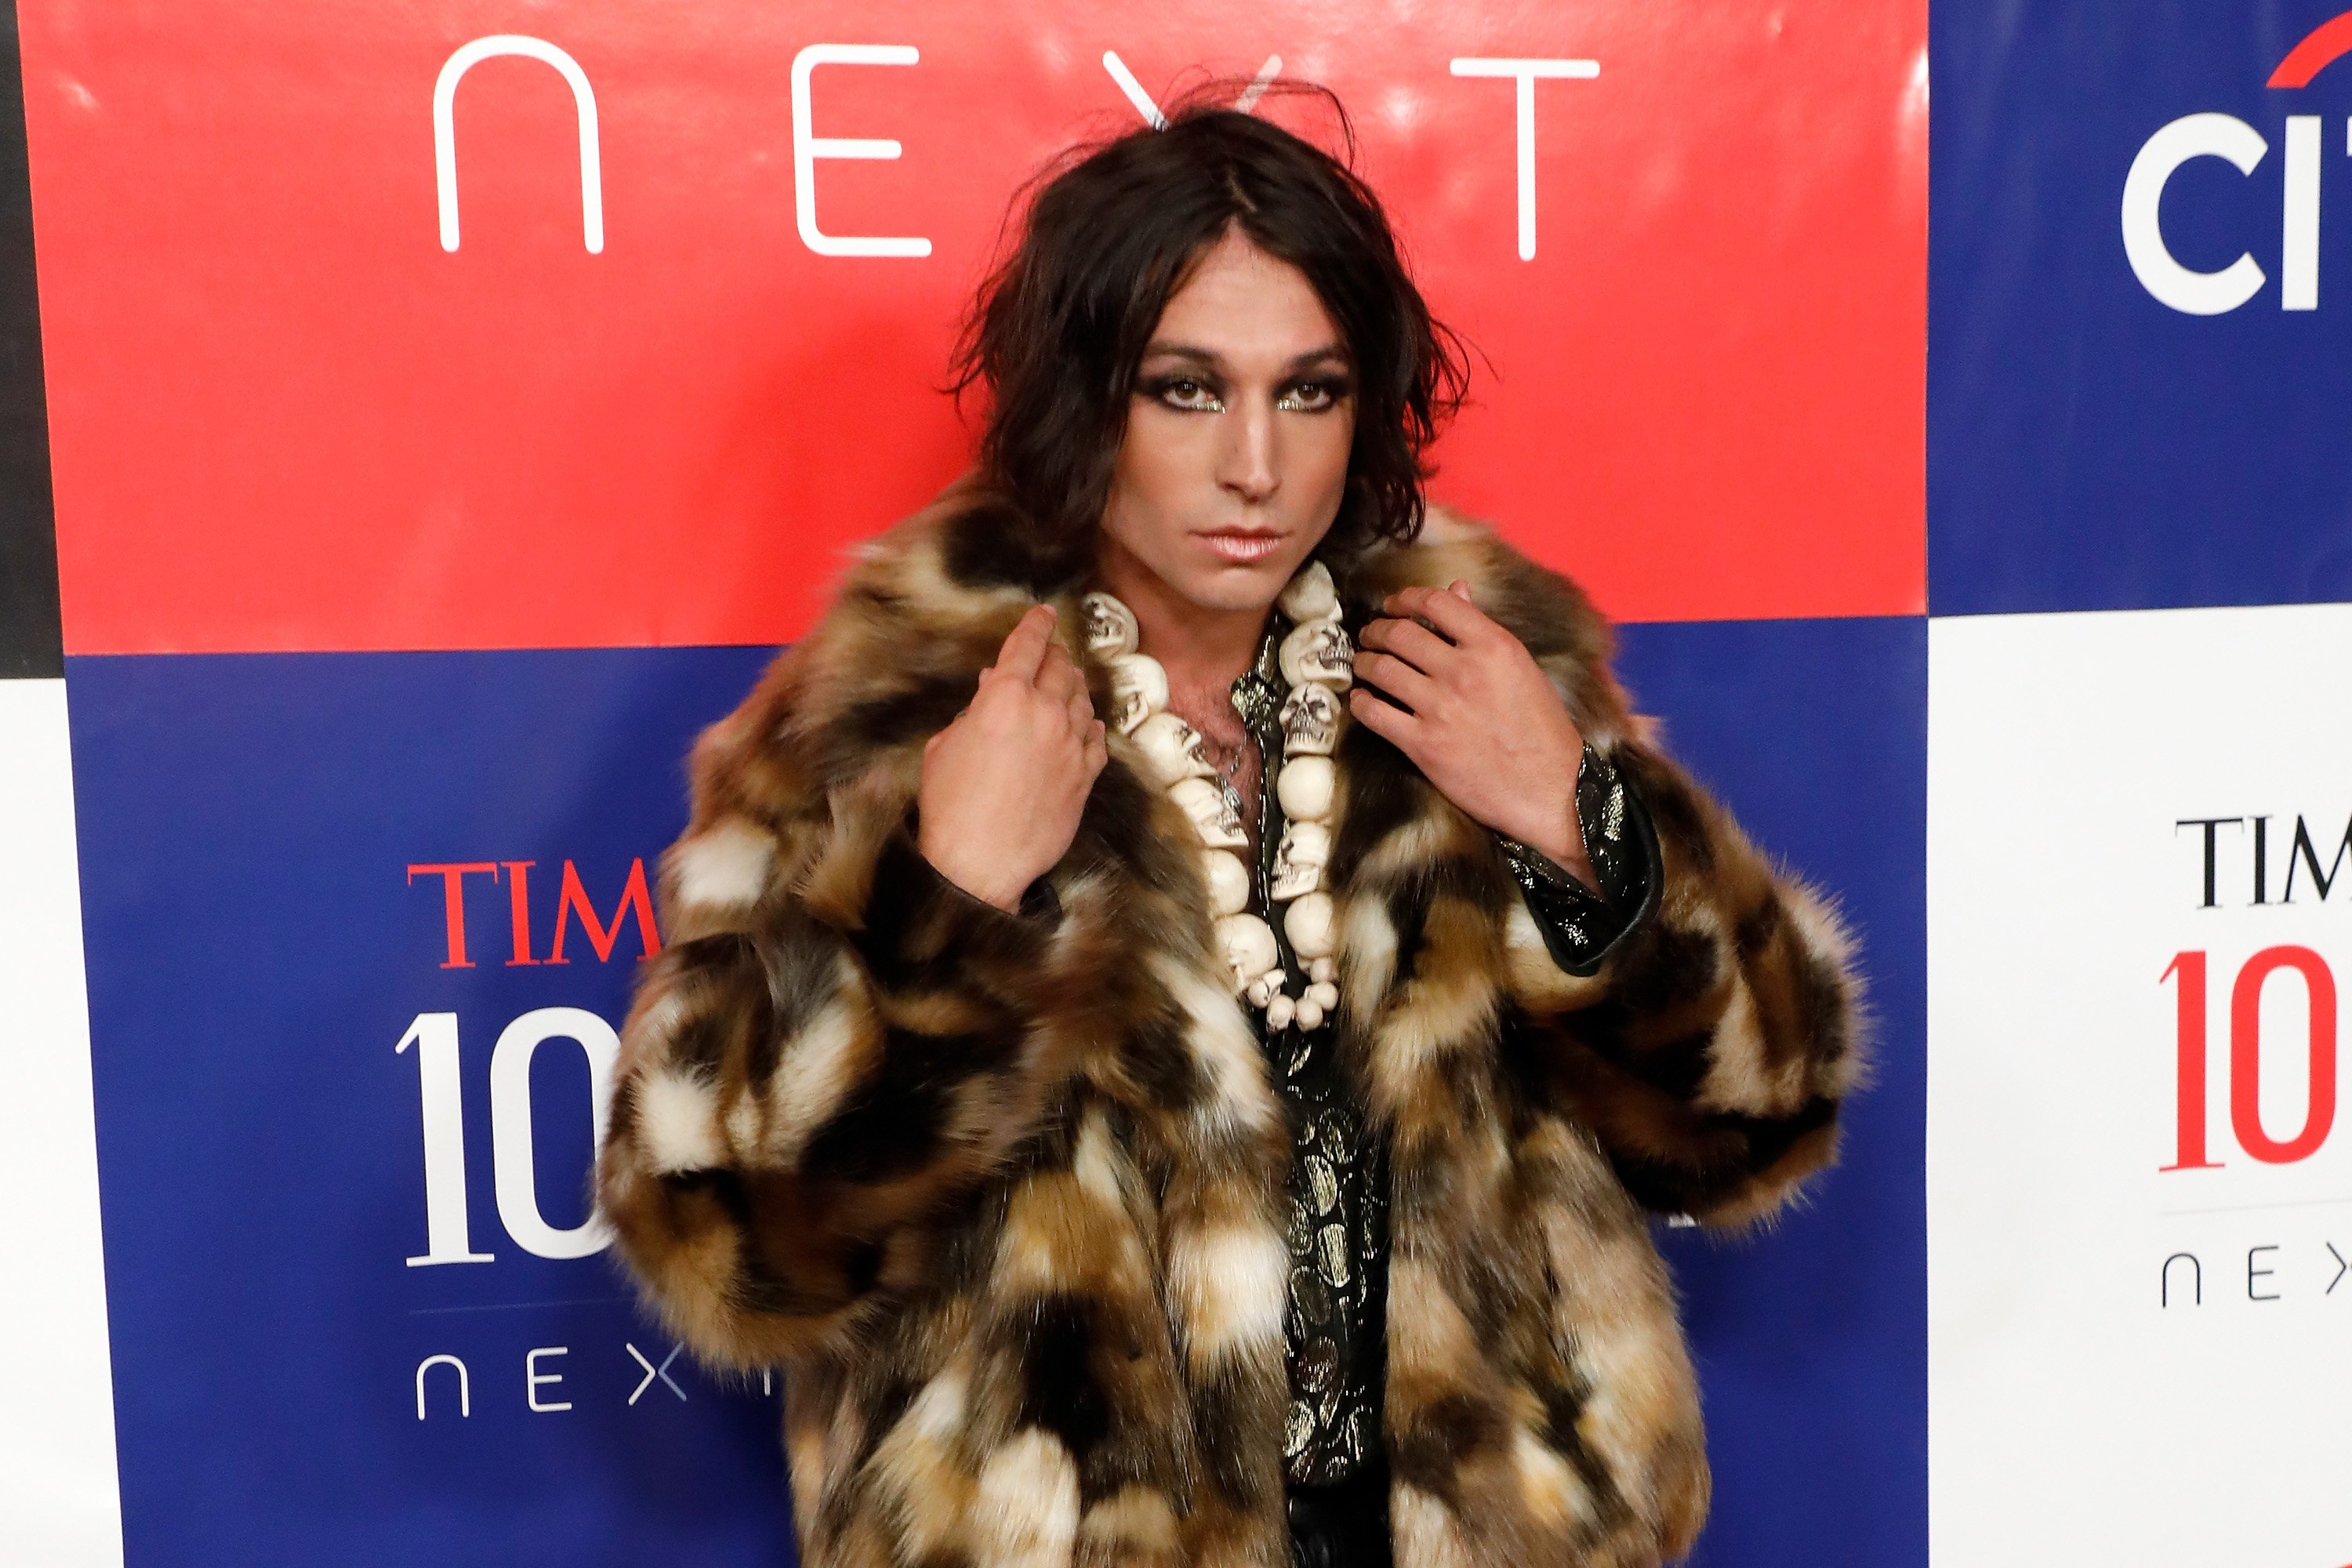 The Flash actor Ezra Miller attends the Time 100 Next at Pier 17 in New York City